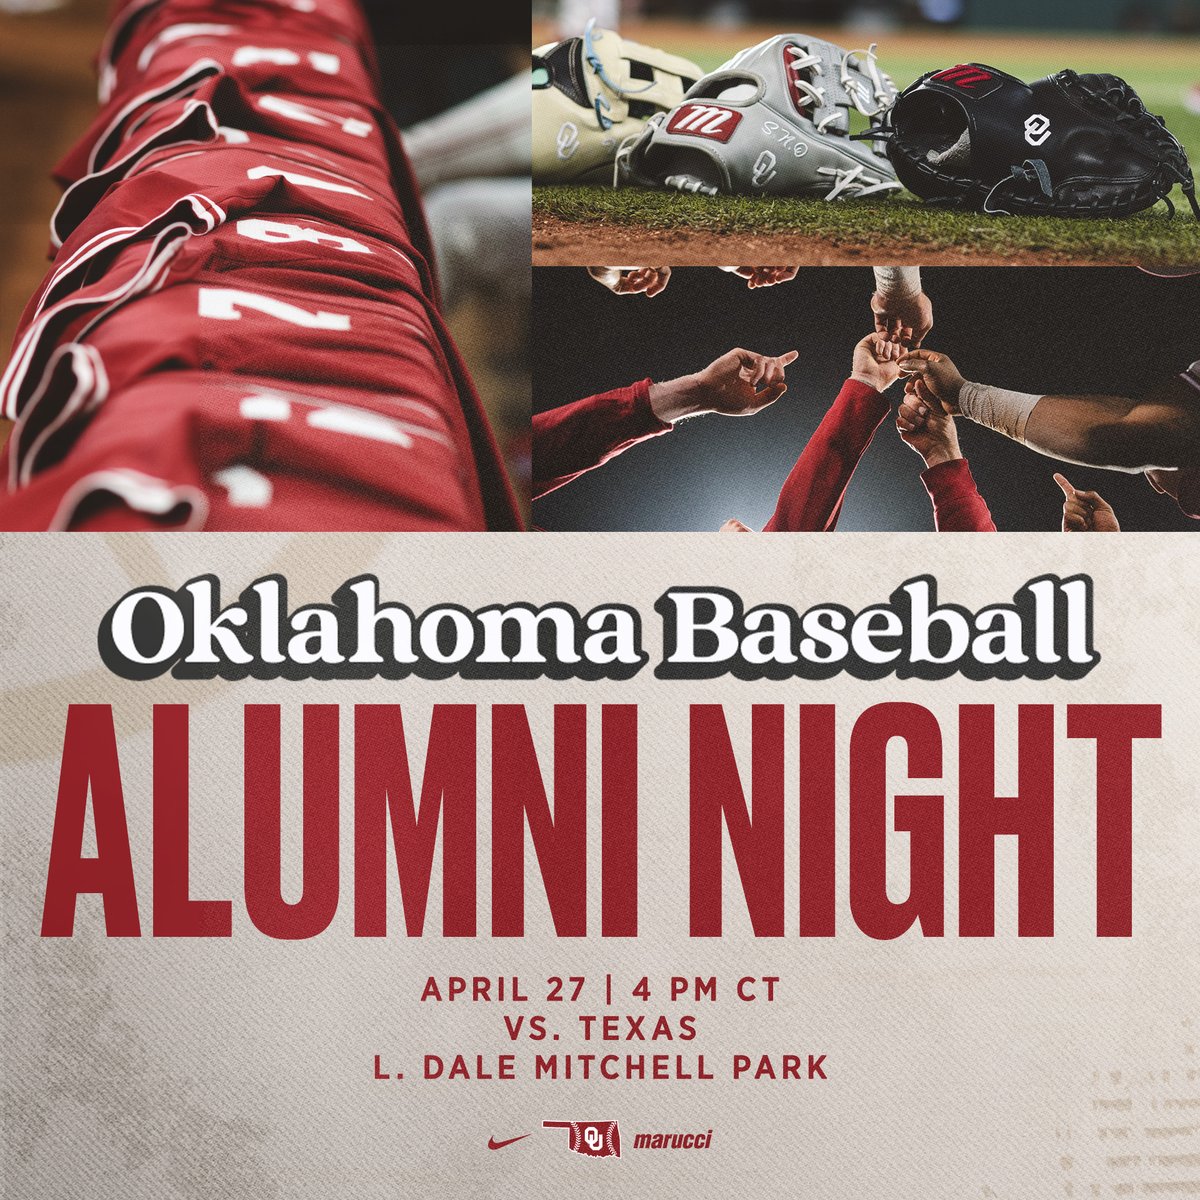 🚨 SPECIAL OFFER 🚨 Bring the whole family out to cheer on @OU_Baseball for an exciting Red River Rivalry at L Dale Mitchell Park on Saturday, April 27! Tickets start at just $5 for #OUAlumni and Friends. #BeatTexas 🎟️ bit.ly/oualumb24